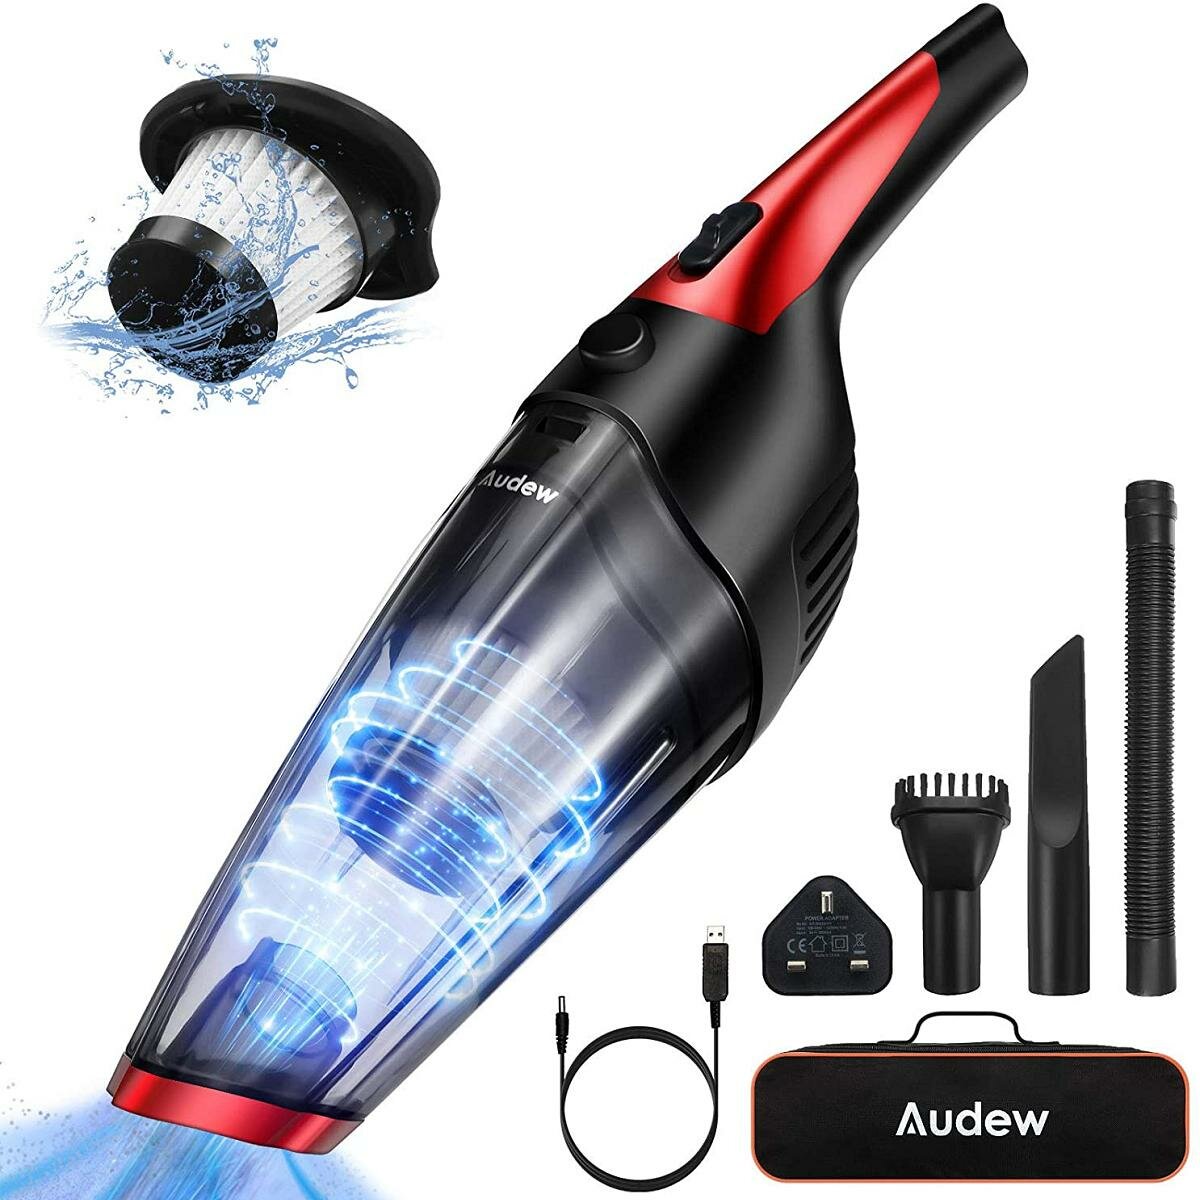 Audew 7000Pa Wireless Handheld Car Cleaning Vacuum Cleaner Filter Washable Low Noise Rechargeable Pet Hair